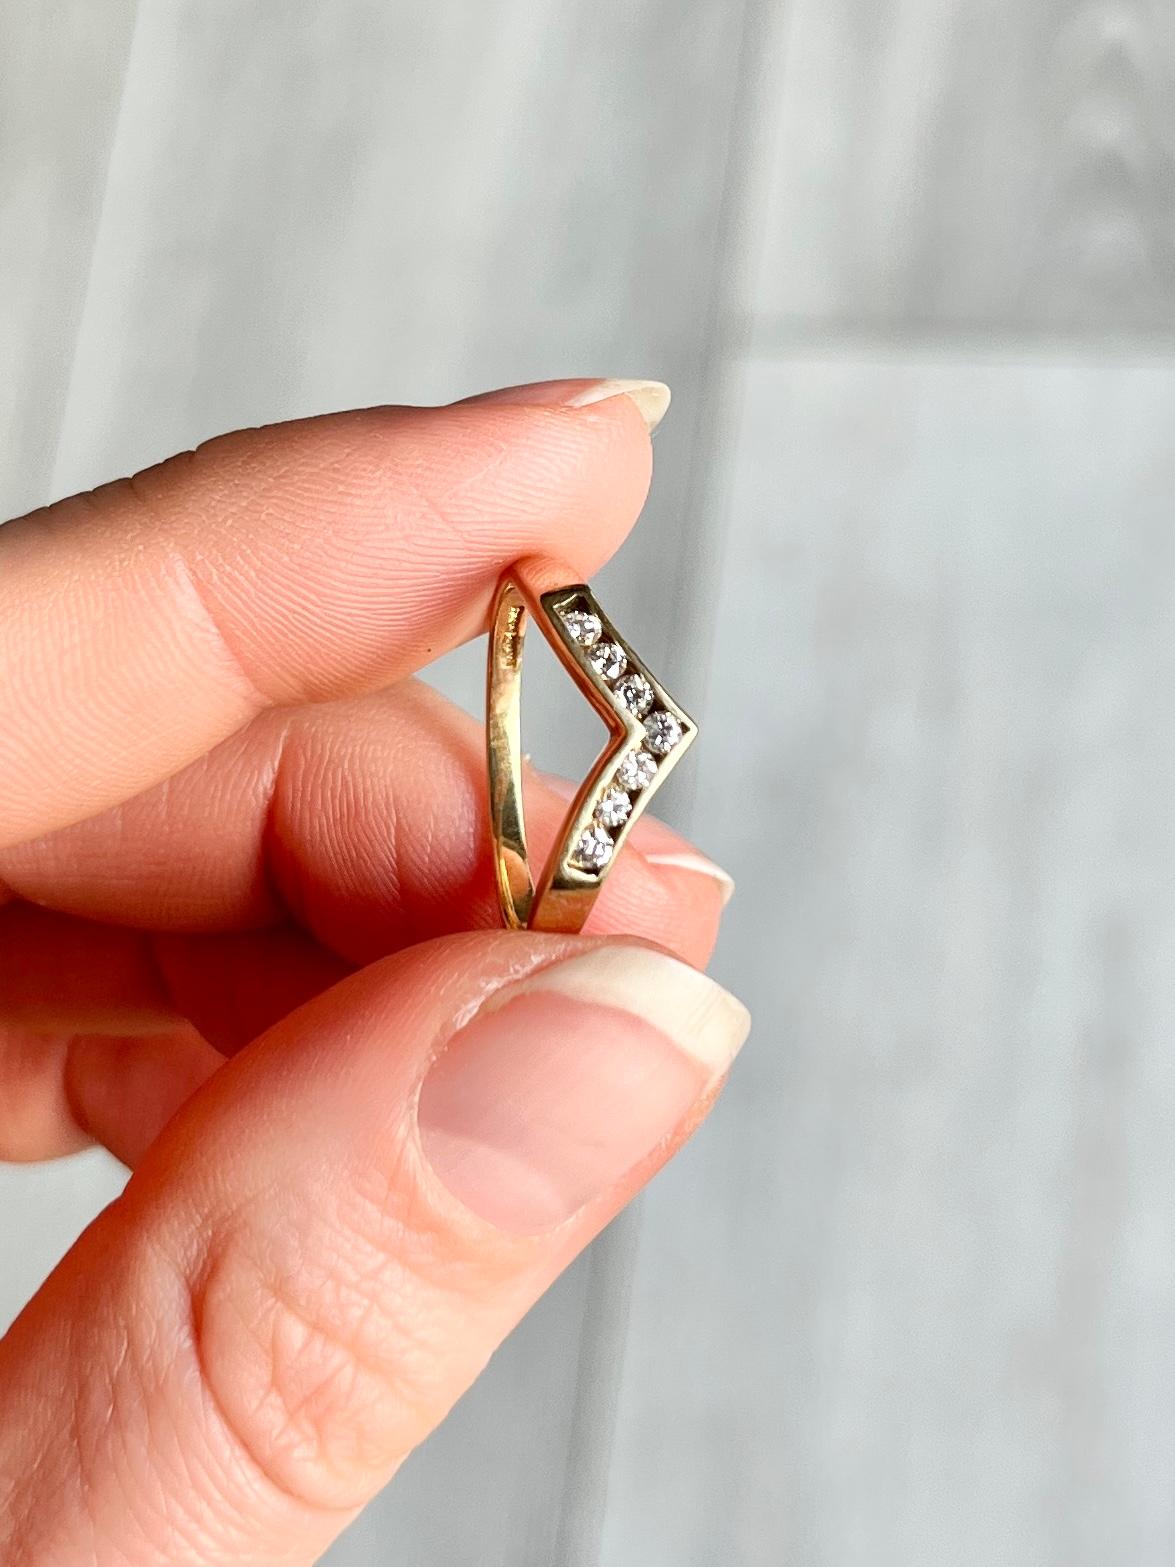 This stylish wishbone ring is modelled in 9carat gold and holds 7 sparking diamonds totalling 14pts. The stones are set in a channel within the band.

Ring Size: M or 6 1/4  
Band Width: 3mm

Weight: 1.6g